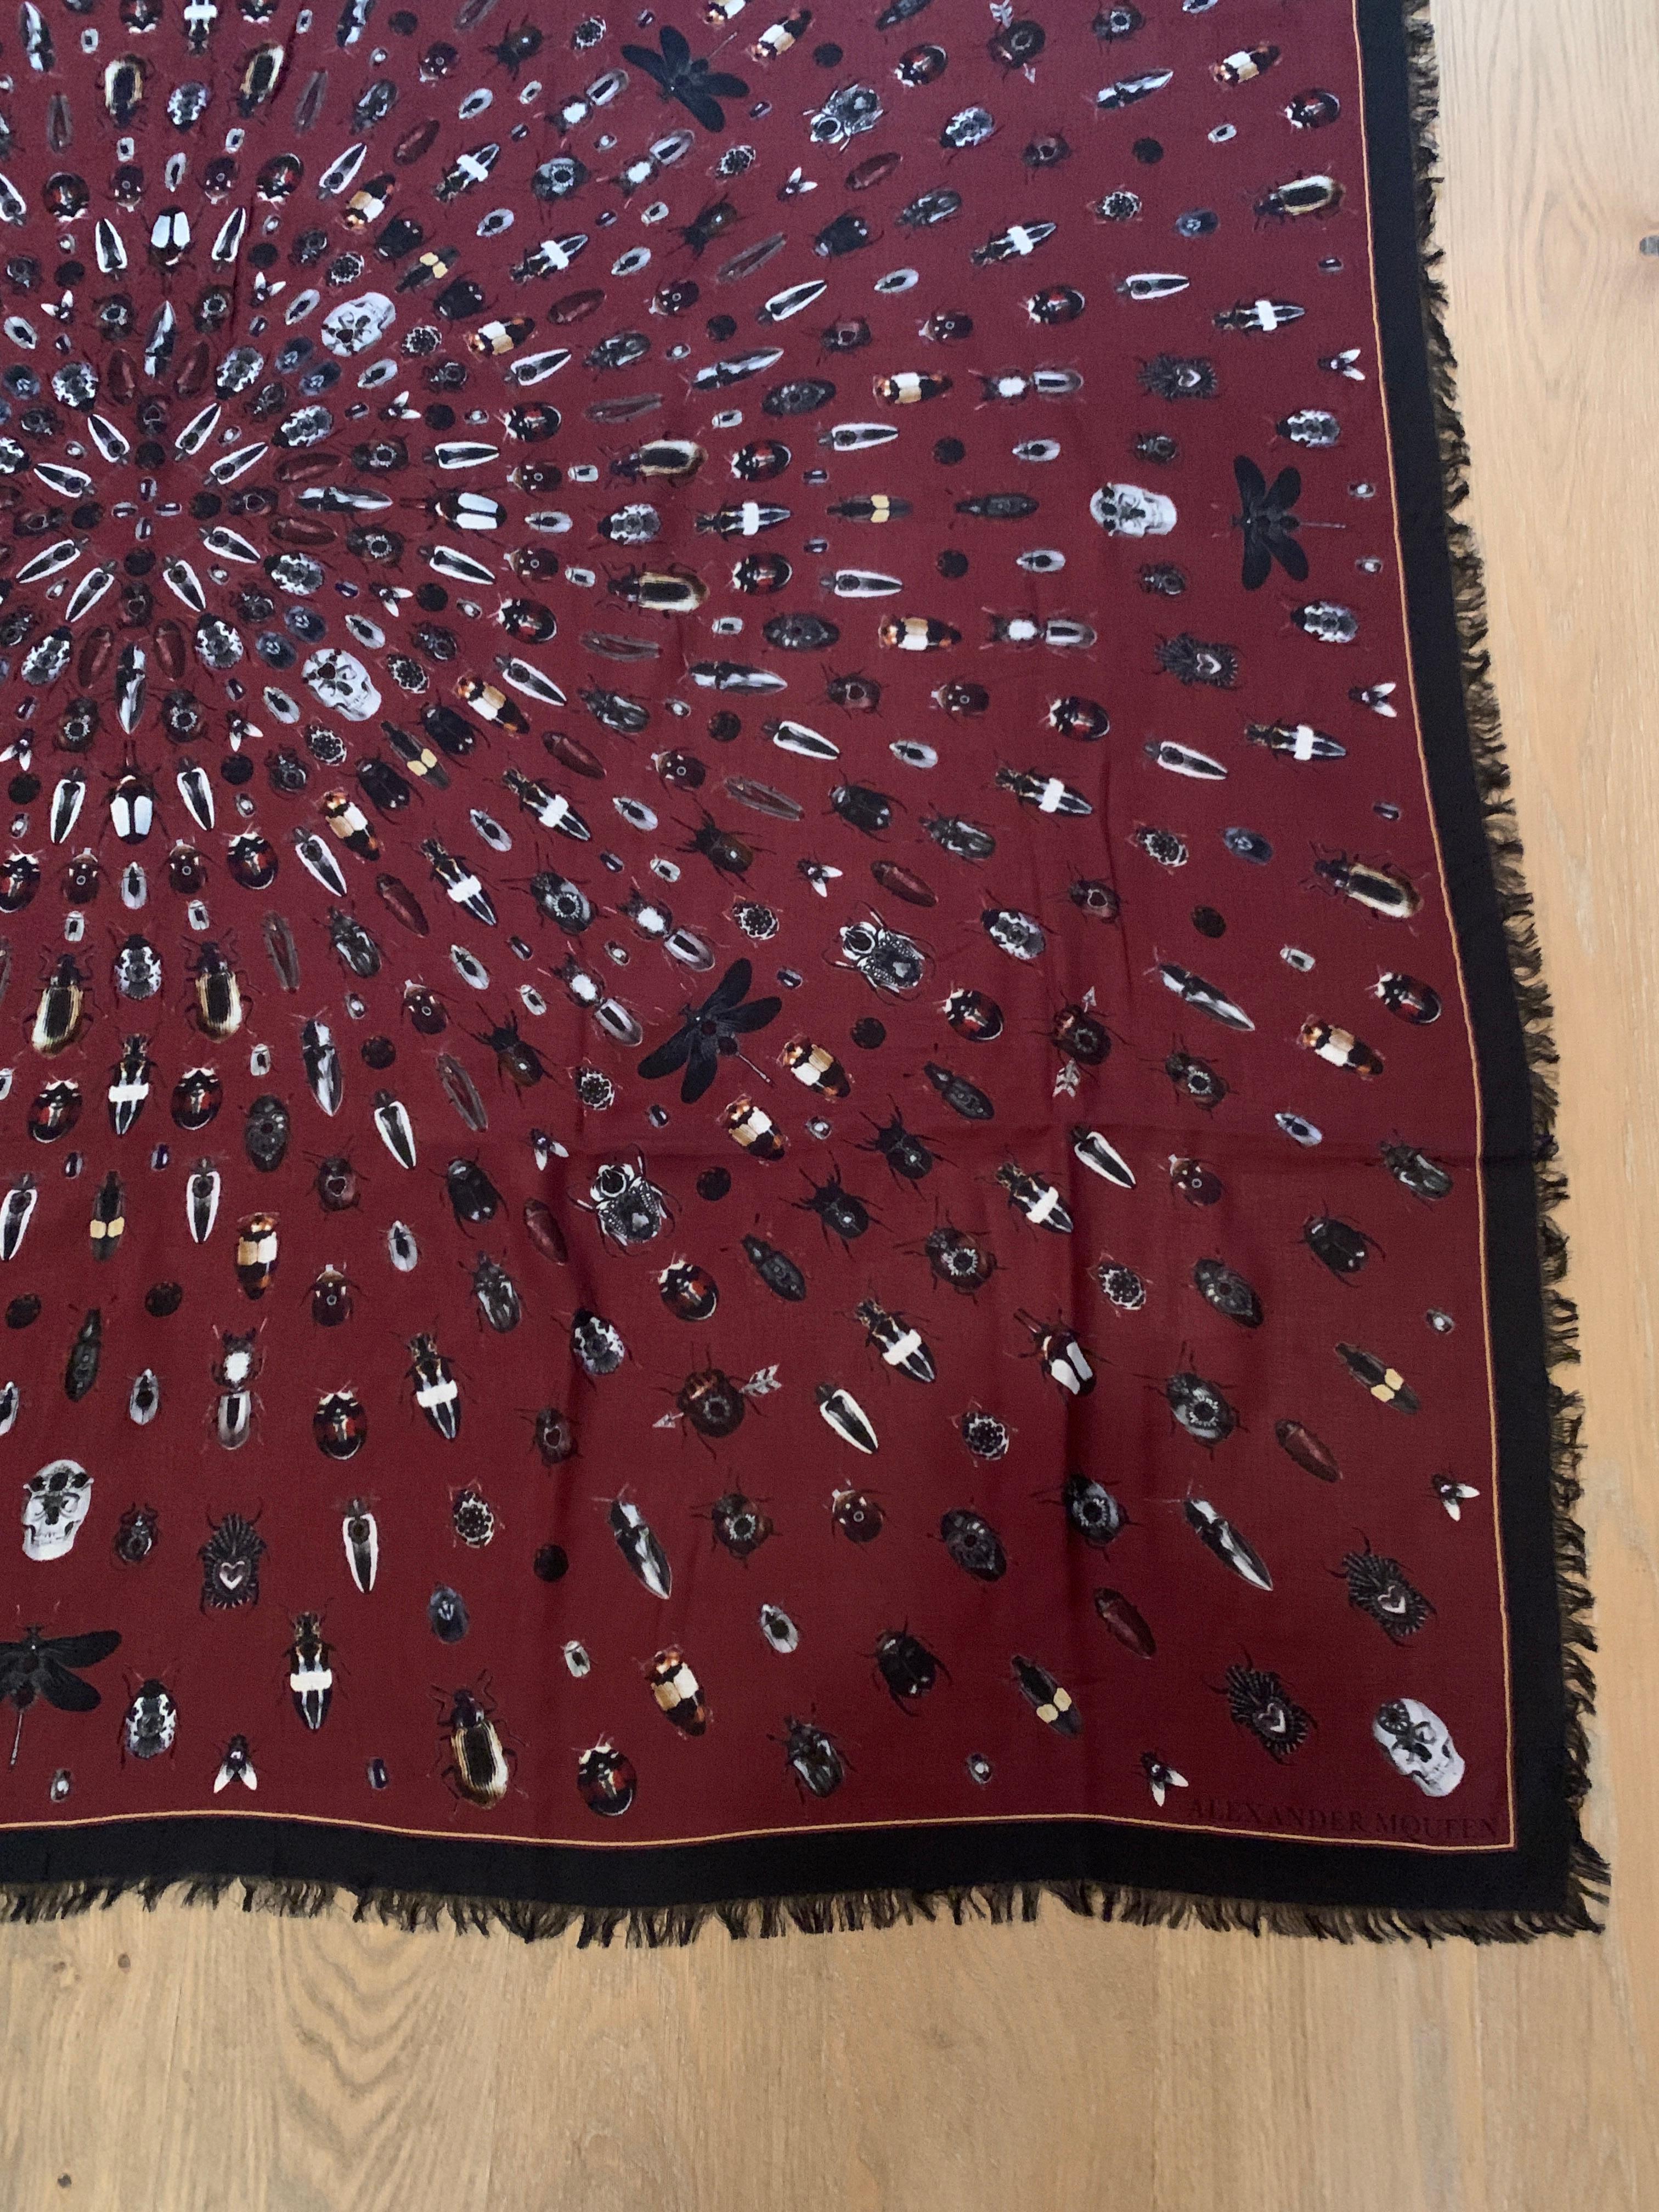 Red Huge New Alexander McQueen Jeweled Bug and Skull Print Scarf in Burgundy Black